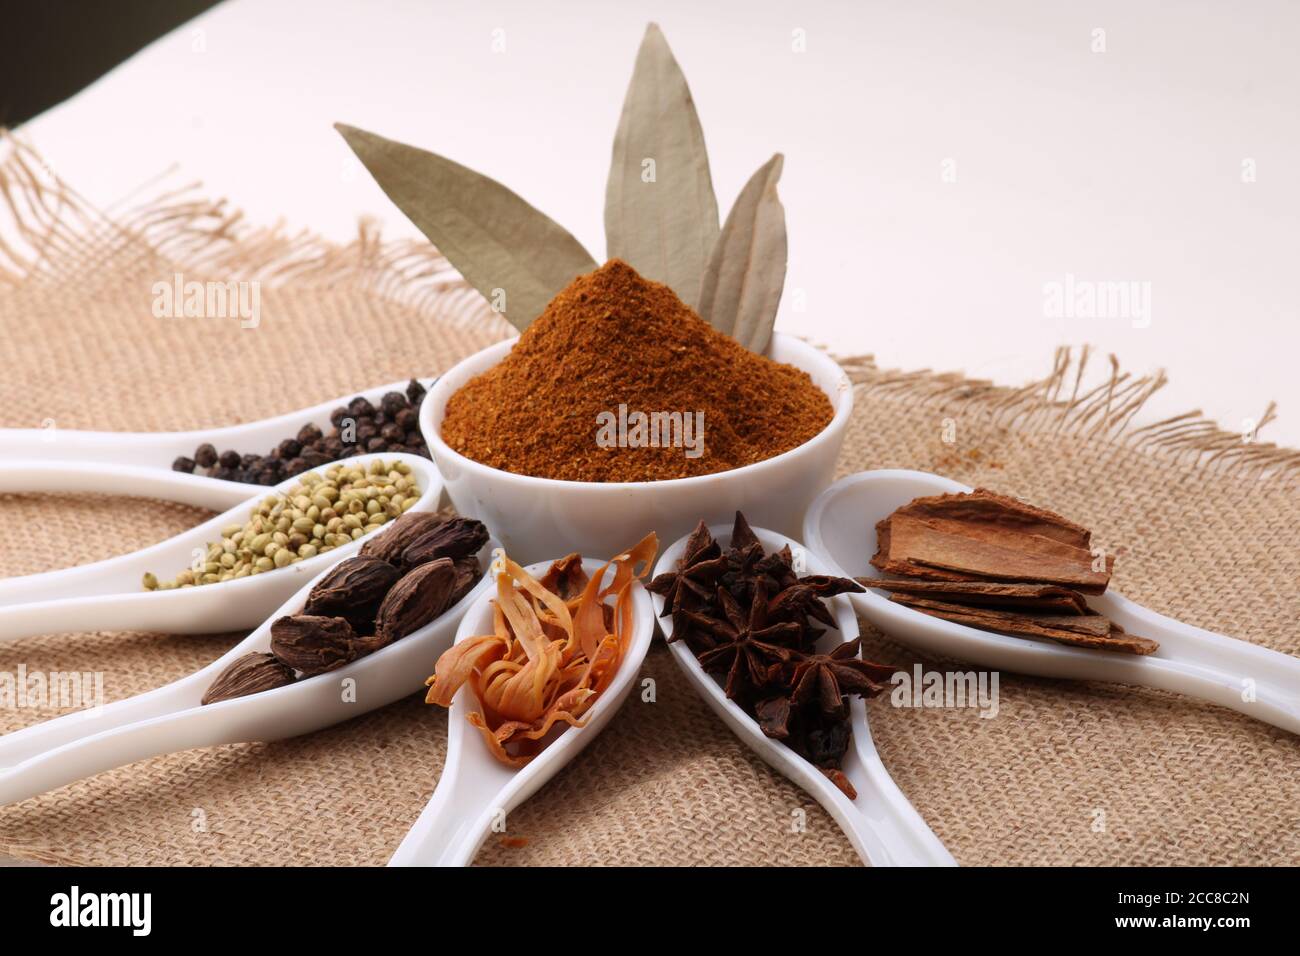 Indian Garam masala powder and colourful spices. Over burlup Stock Photo